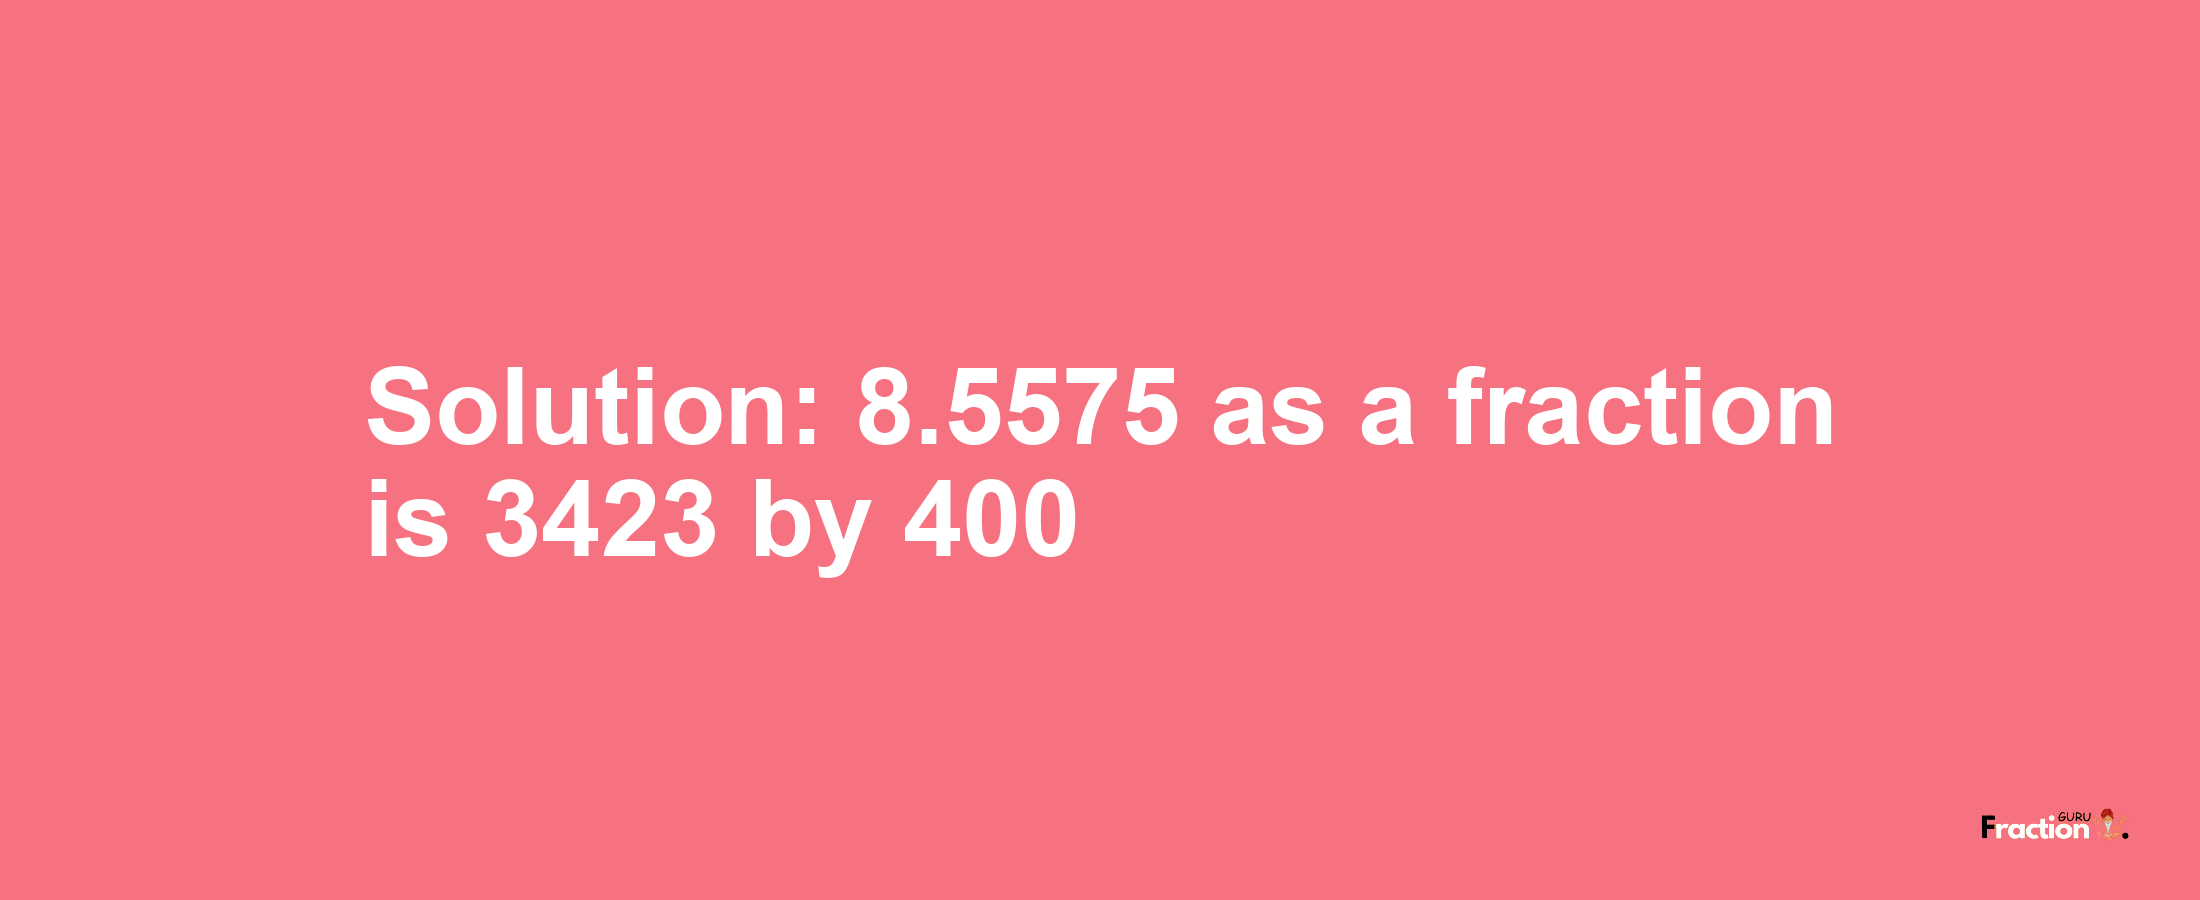 Solution:8.5575 as a fraction is 3423/400